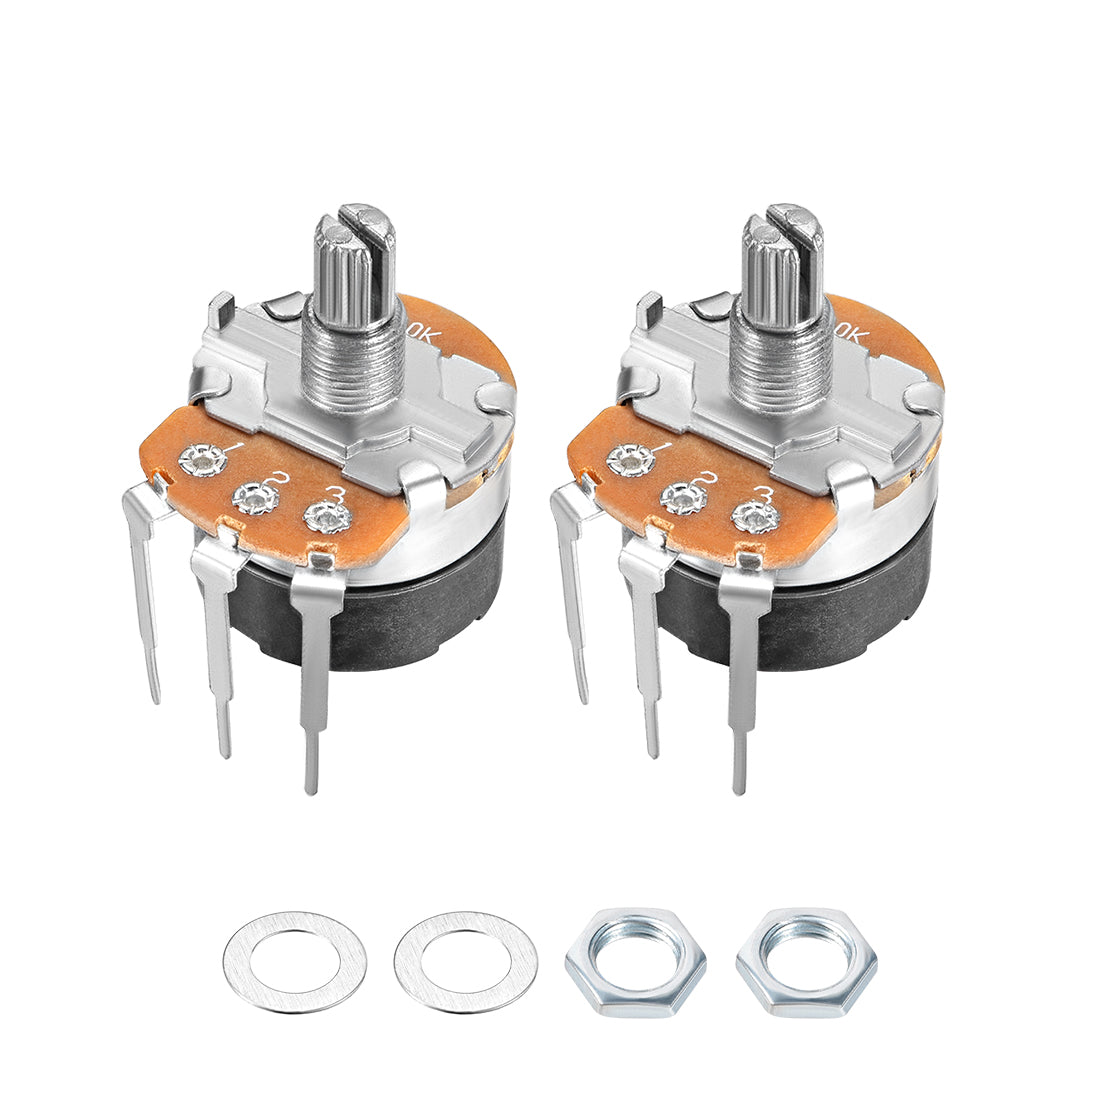 uxcell Uxcell WH138 Potentiometer with Switch B10K Ohm Variable Resistors Single Turn Rotary Carbon Film Taper 2pcs